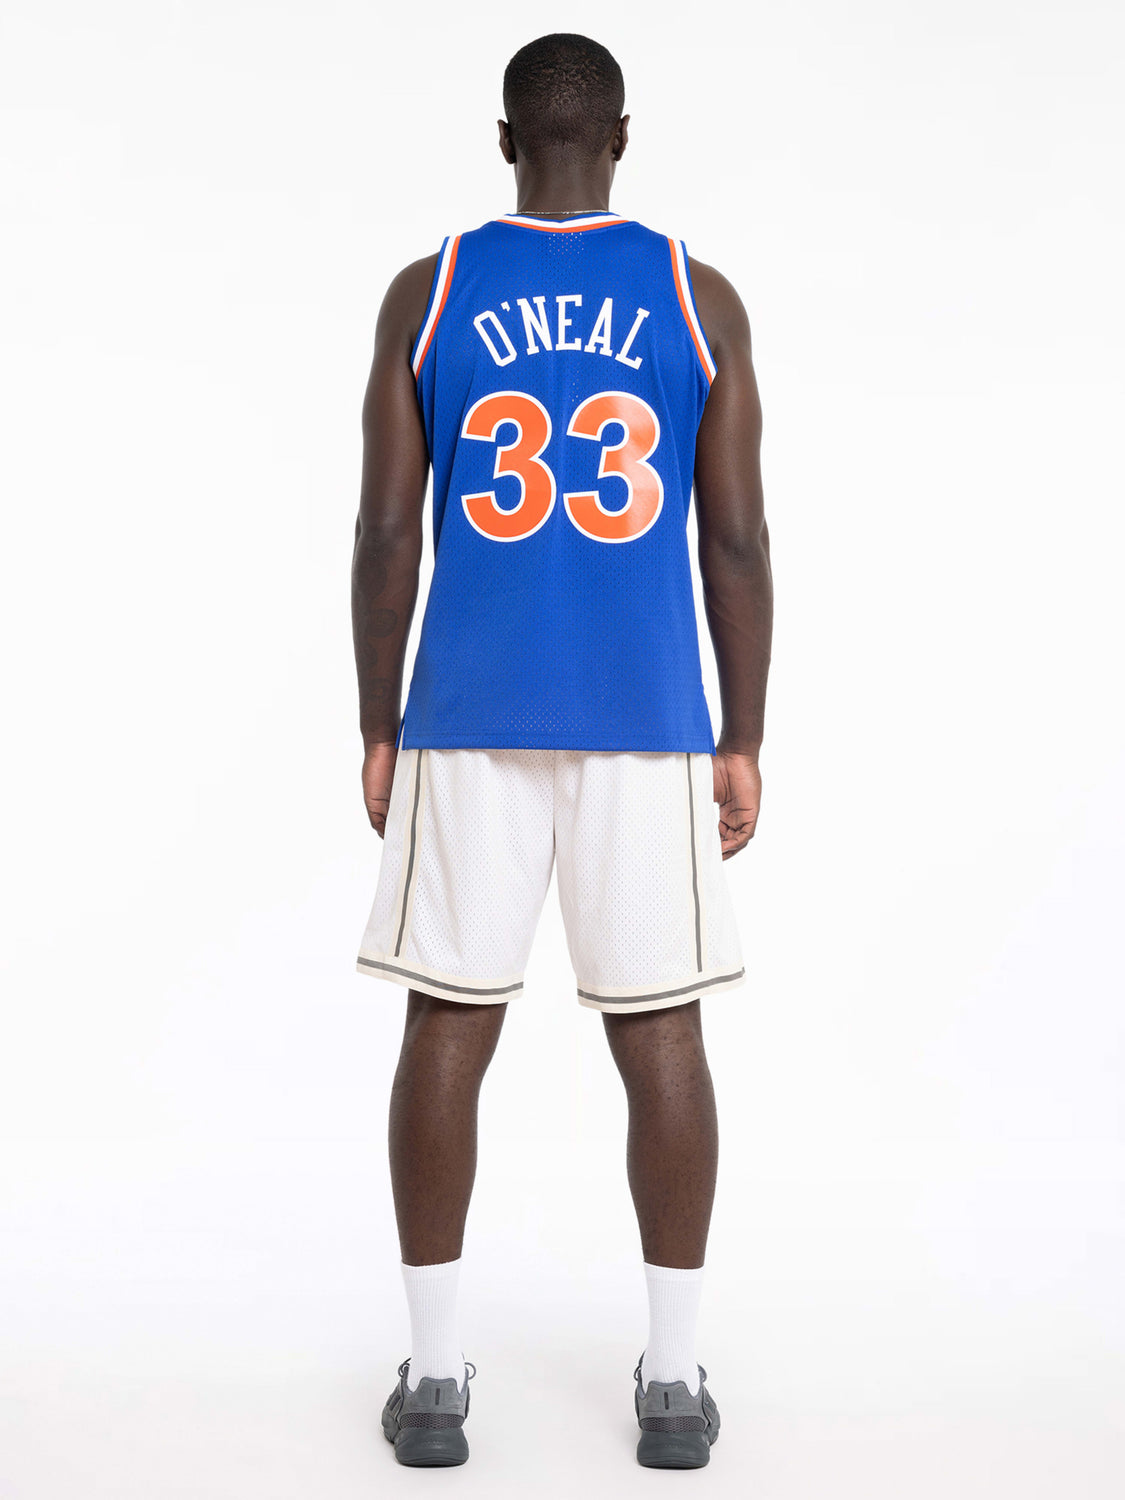 Men's Cleveland Cavaliers Shaquille O'Neal Mitchell & Ness Royal Hardwood  Classics 2009/10 Jersey